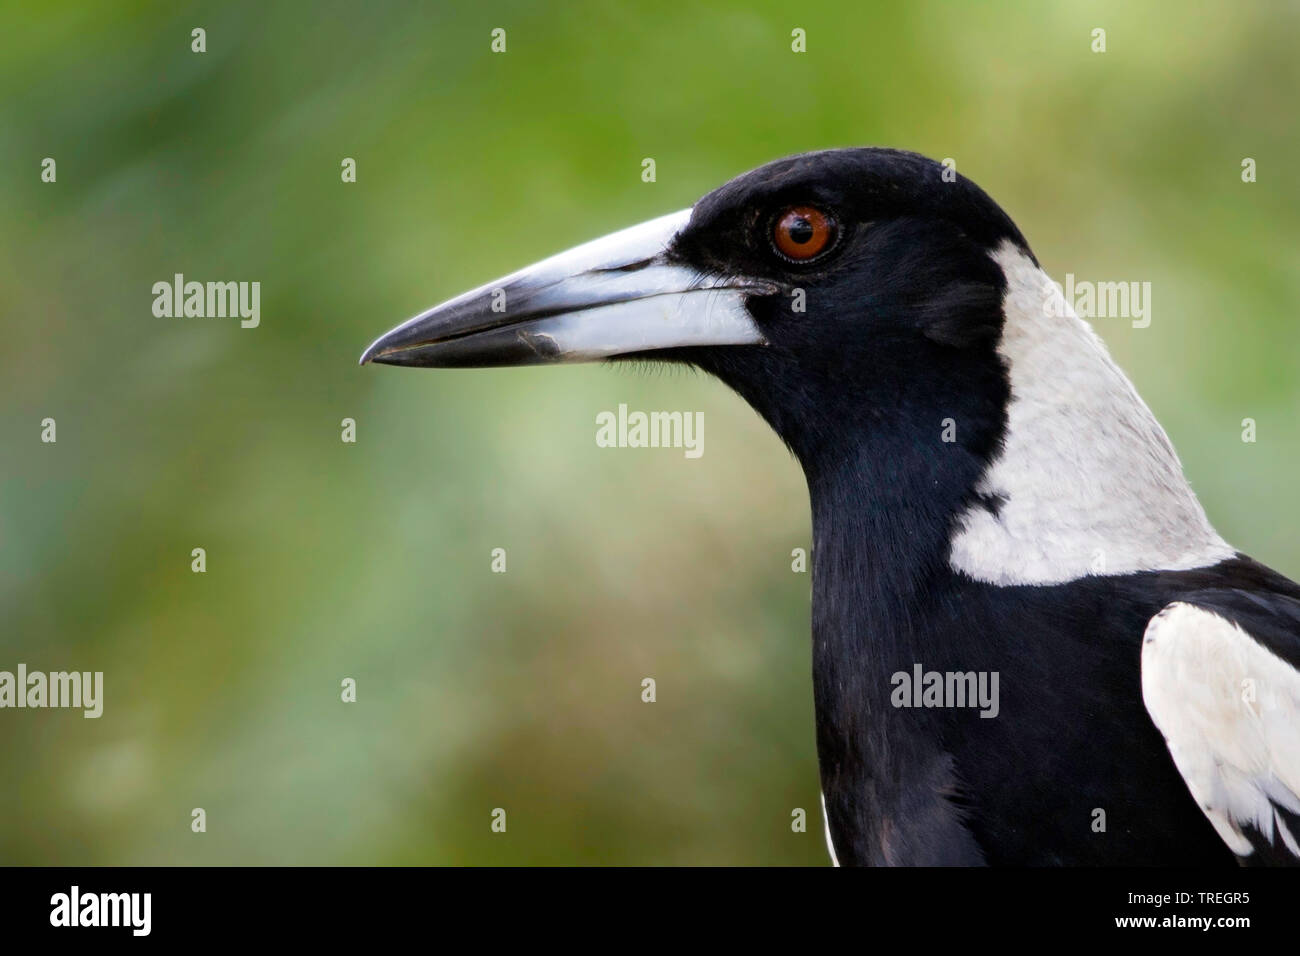 Black-backed magpie, Australian Magpie (Gymnorhina tibicen, Cracticus tibicen), Introduced in Fiji, where the birds are not considered an invasive species as of this moment. , Fiji Stock Photo